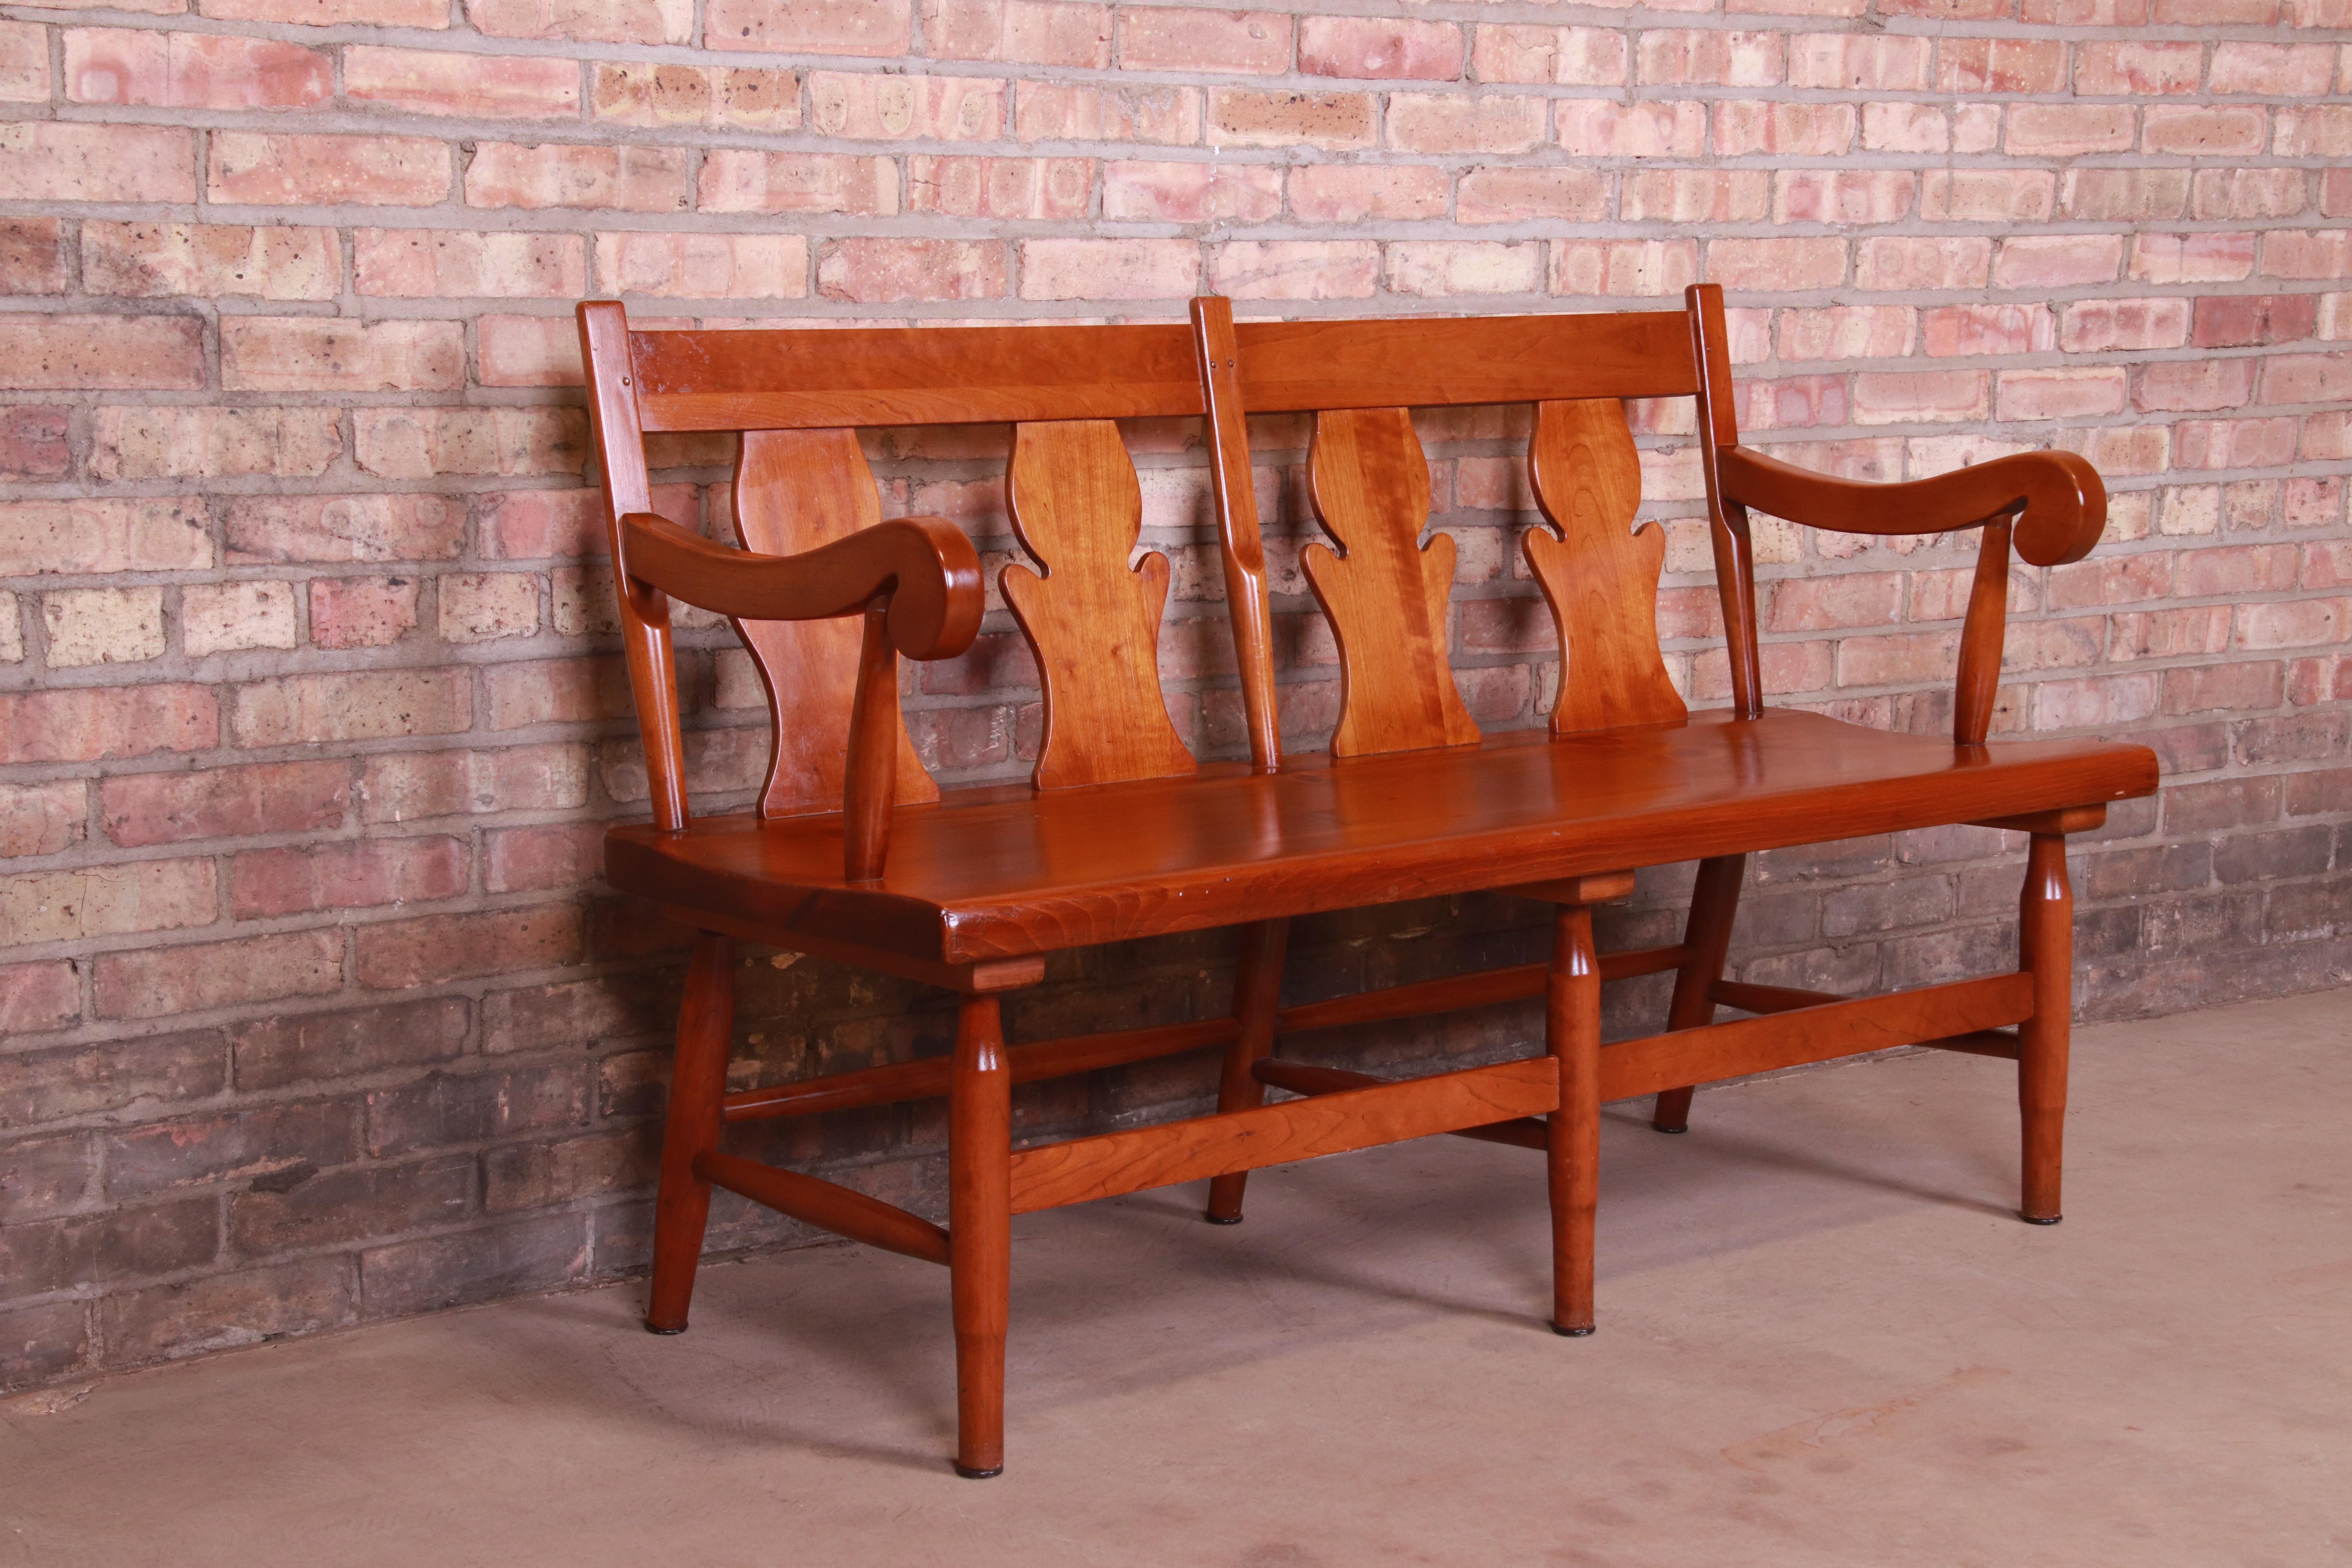 20th Century Stickley American Colonial Cherry Wood Fiddle Back Bench or Settee, Circa 1950s